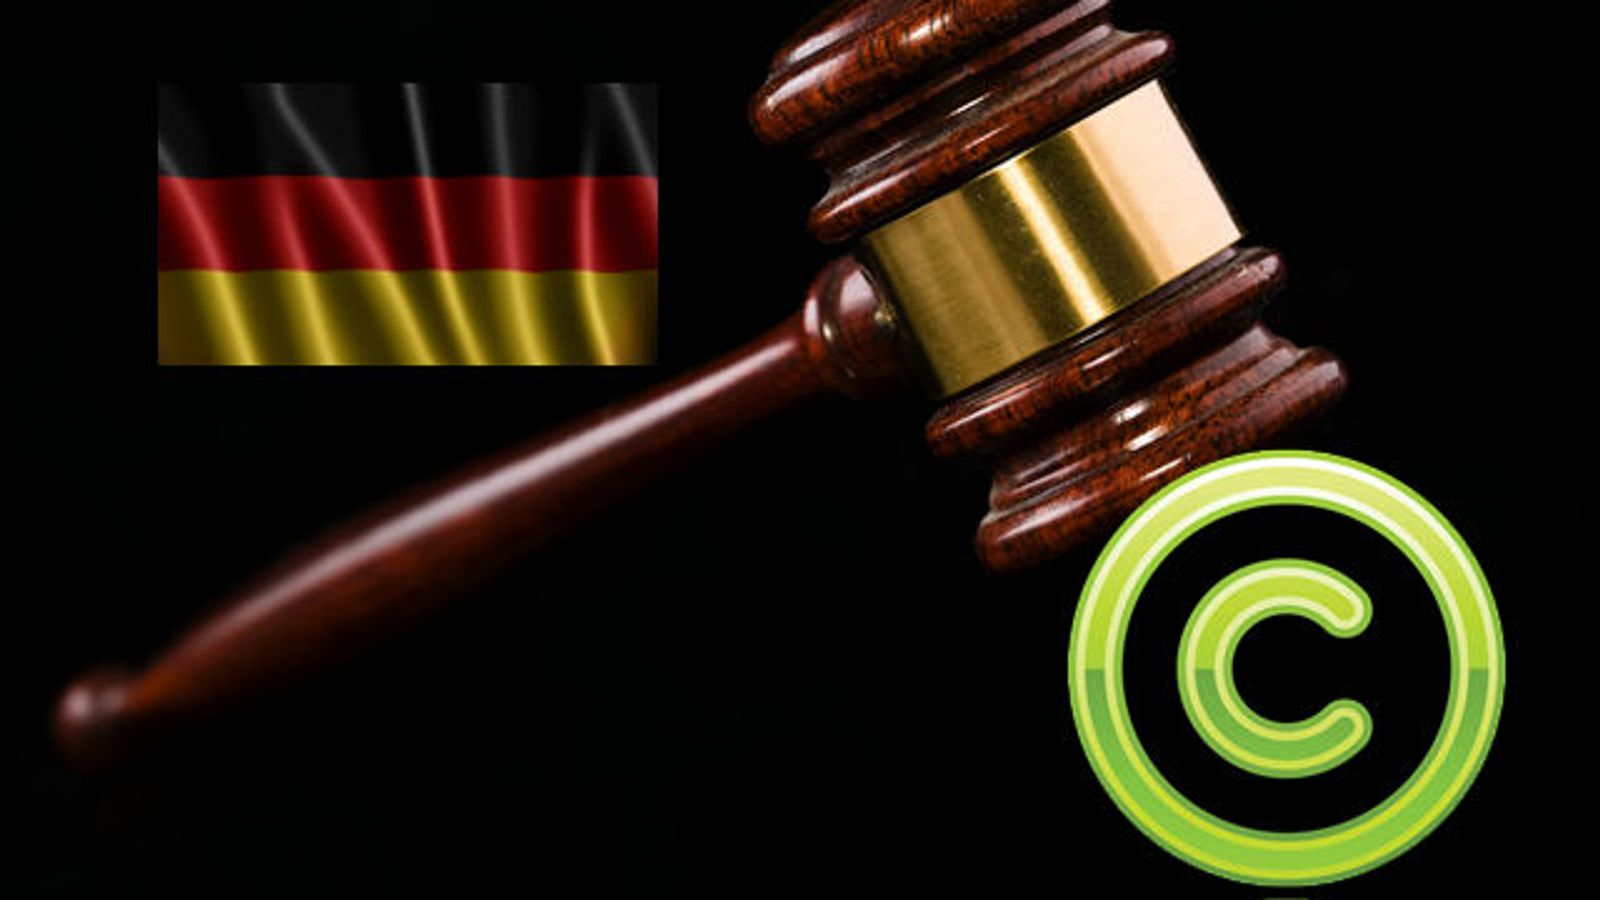 German Law Firm: Redtube a 'Test Case' For More End-user Fines